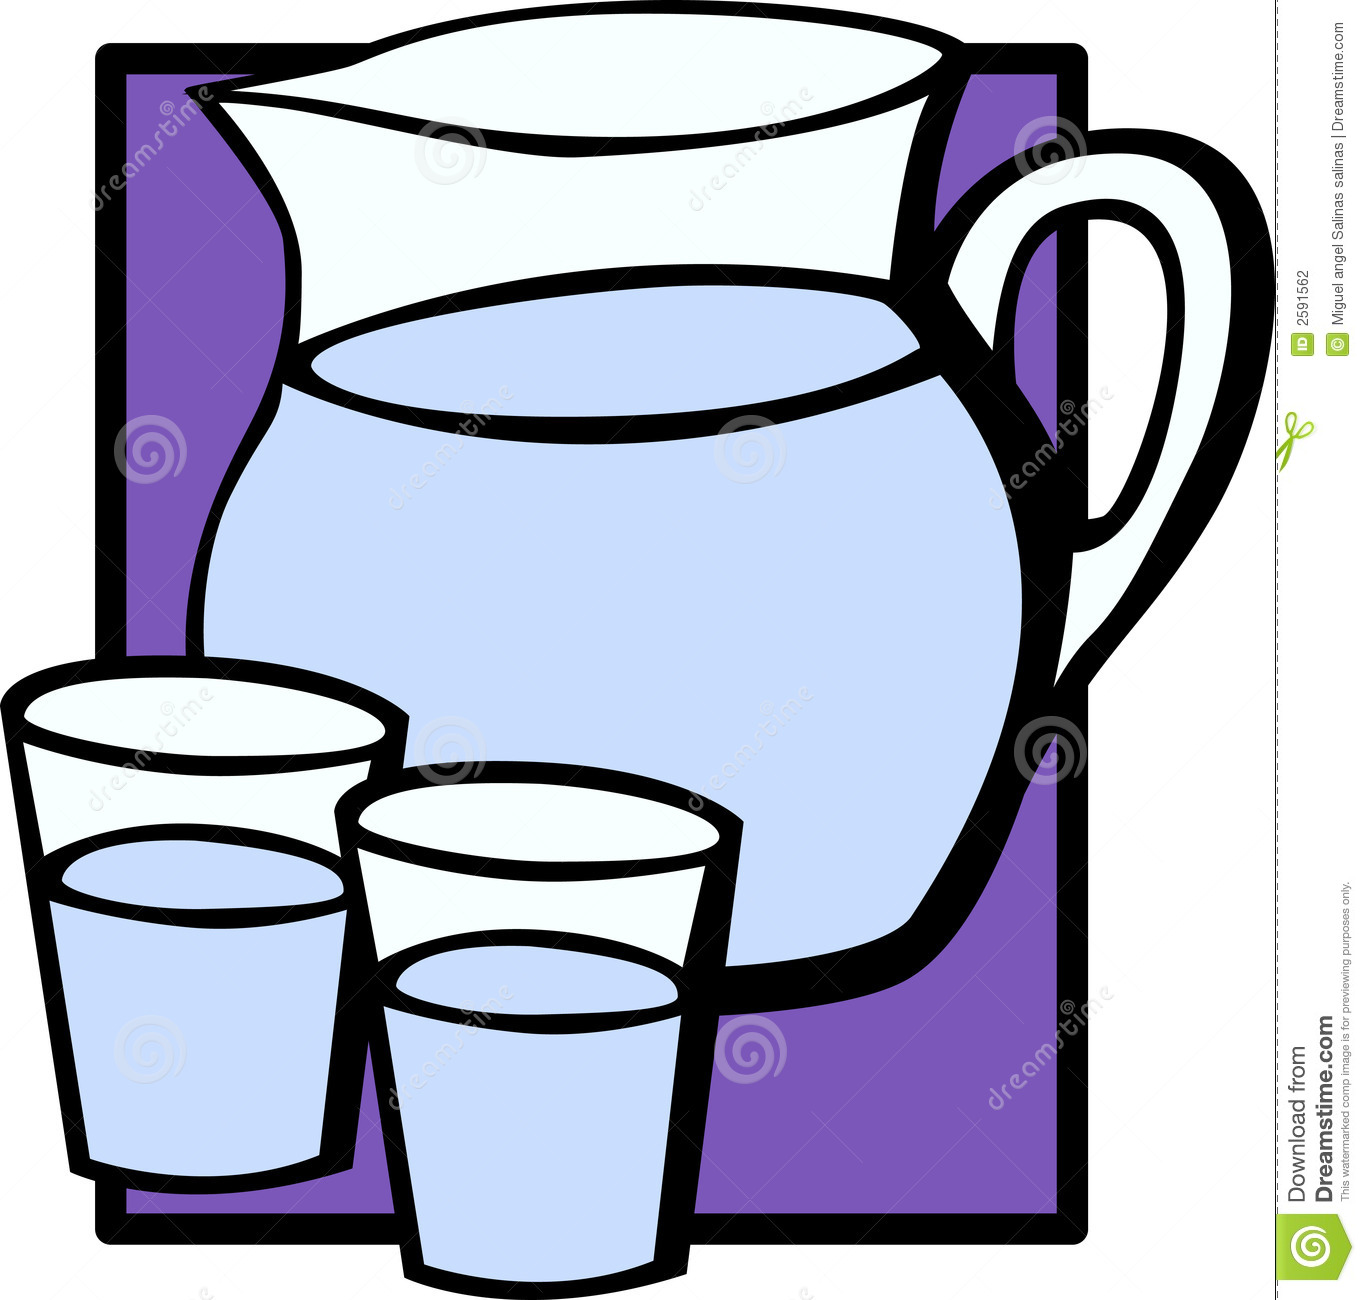 Pitcher Of Water Clipart   Clipart Panda   Free Clipart Images